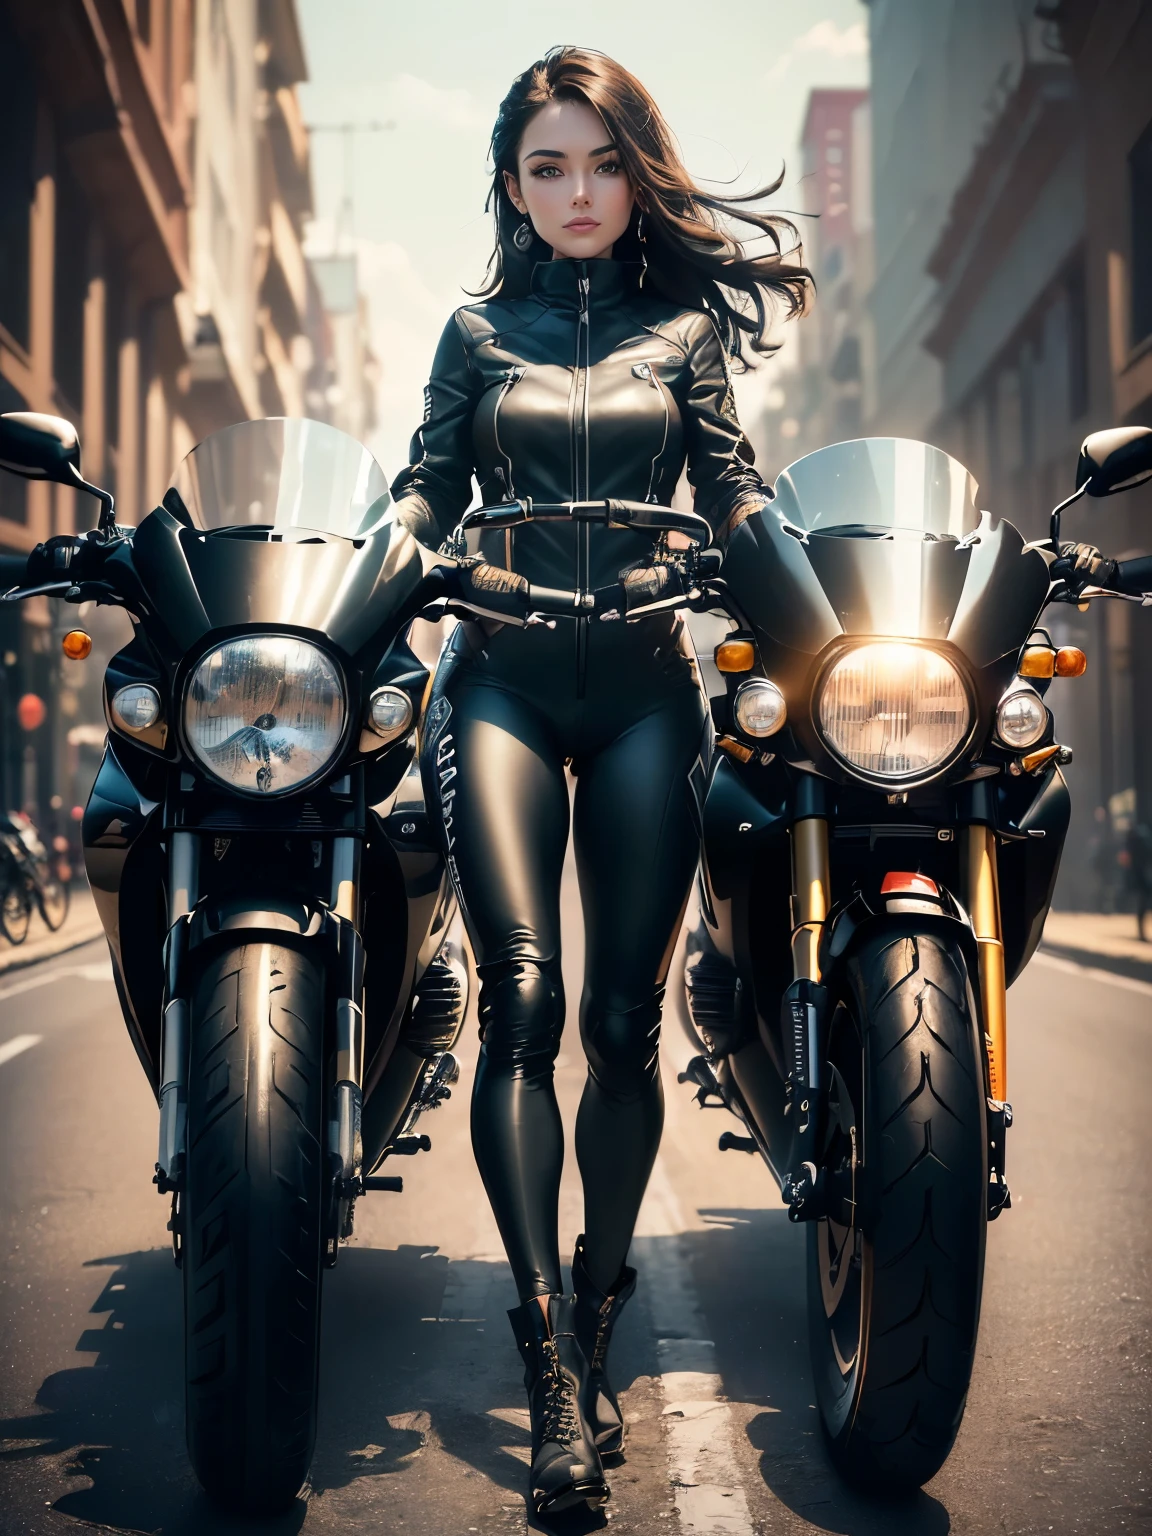 ((highest quality, 8k, masterpiece: 1.3)), Masterpiece Best Quality, (Sharpen your face: 1.5), perfect body beauty: 1.4, (The bike is facing 70 degrees:1.5), (((Woman on motorcycle))),slender body,((Long-sleeved biker jacket and black long pants)),Highly detailed face and skin texture, Natural light,smile、rider boots, long legs, camel toe